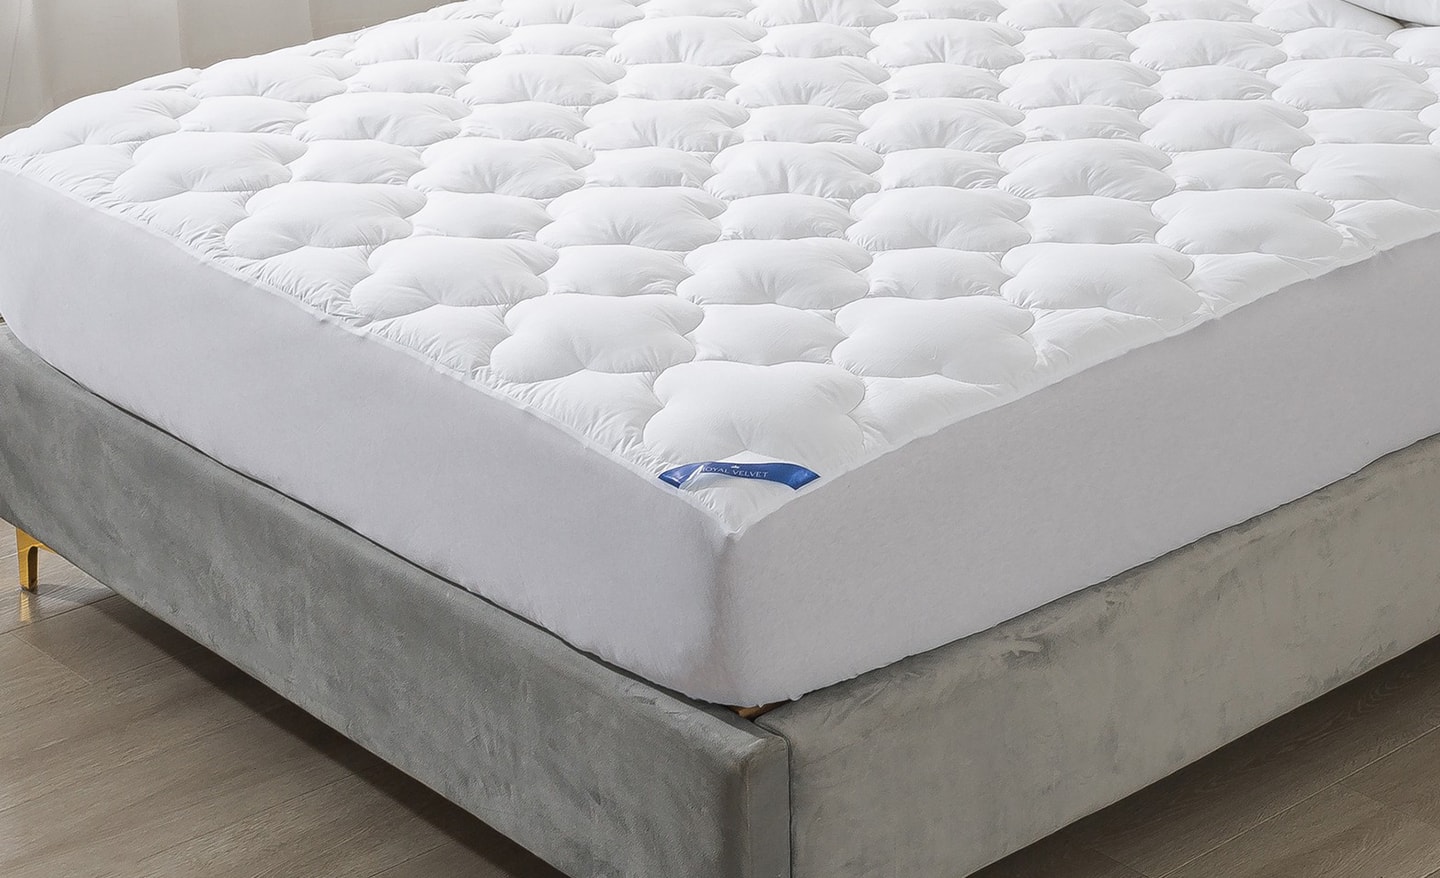 https://dam.thdstatic.com/content/production/aFY7yJX_OKx_eGaGh5FG0A/vHz78MilS6DsPisvSrg_AA/Original%20file/best-mattress-toppers-and-pads-for-a-restful-sleep-2023-section-8.jpg